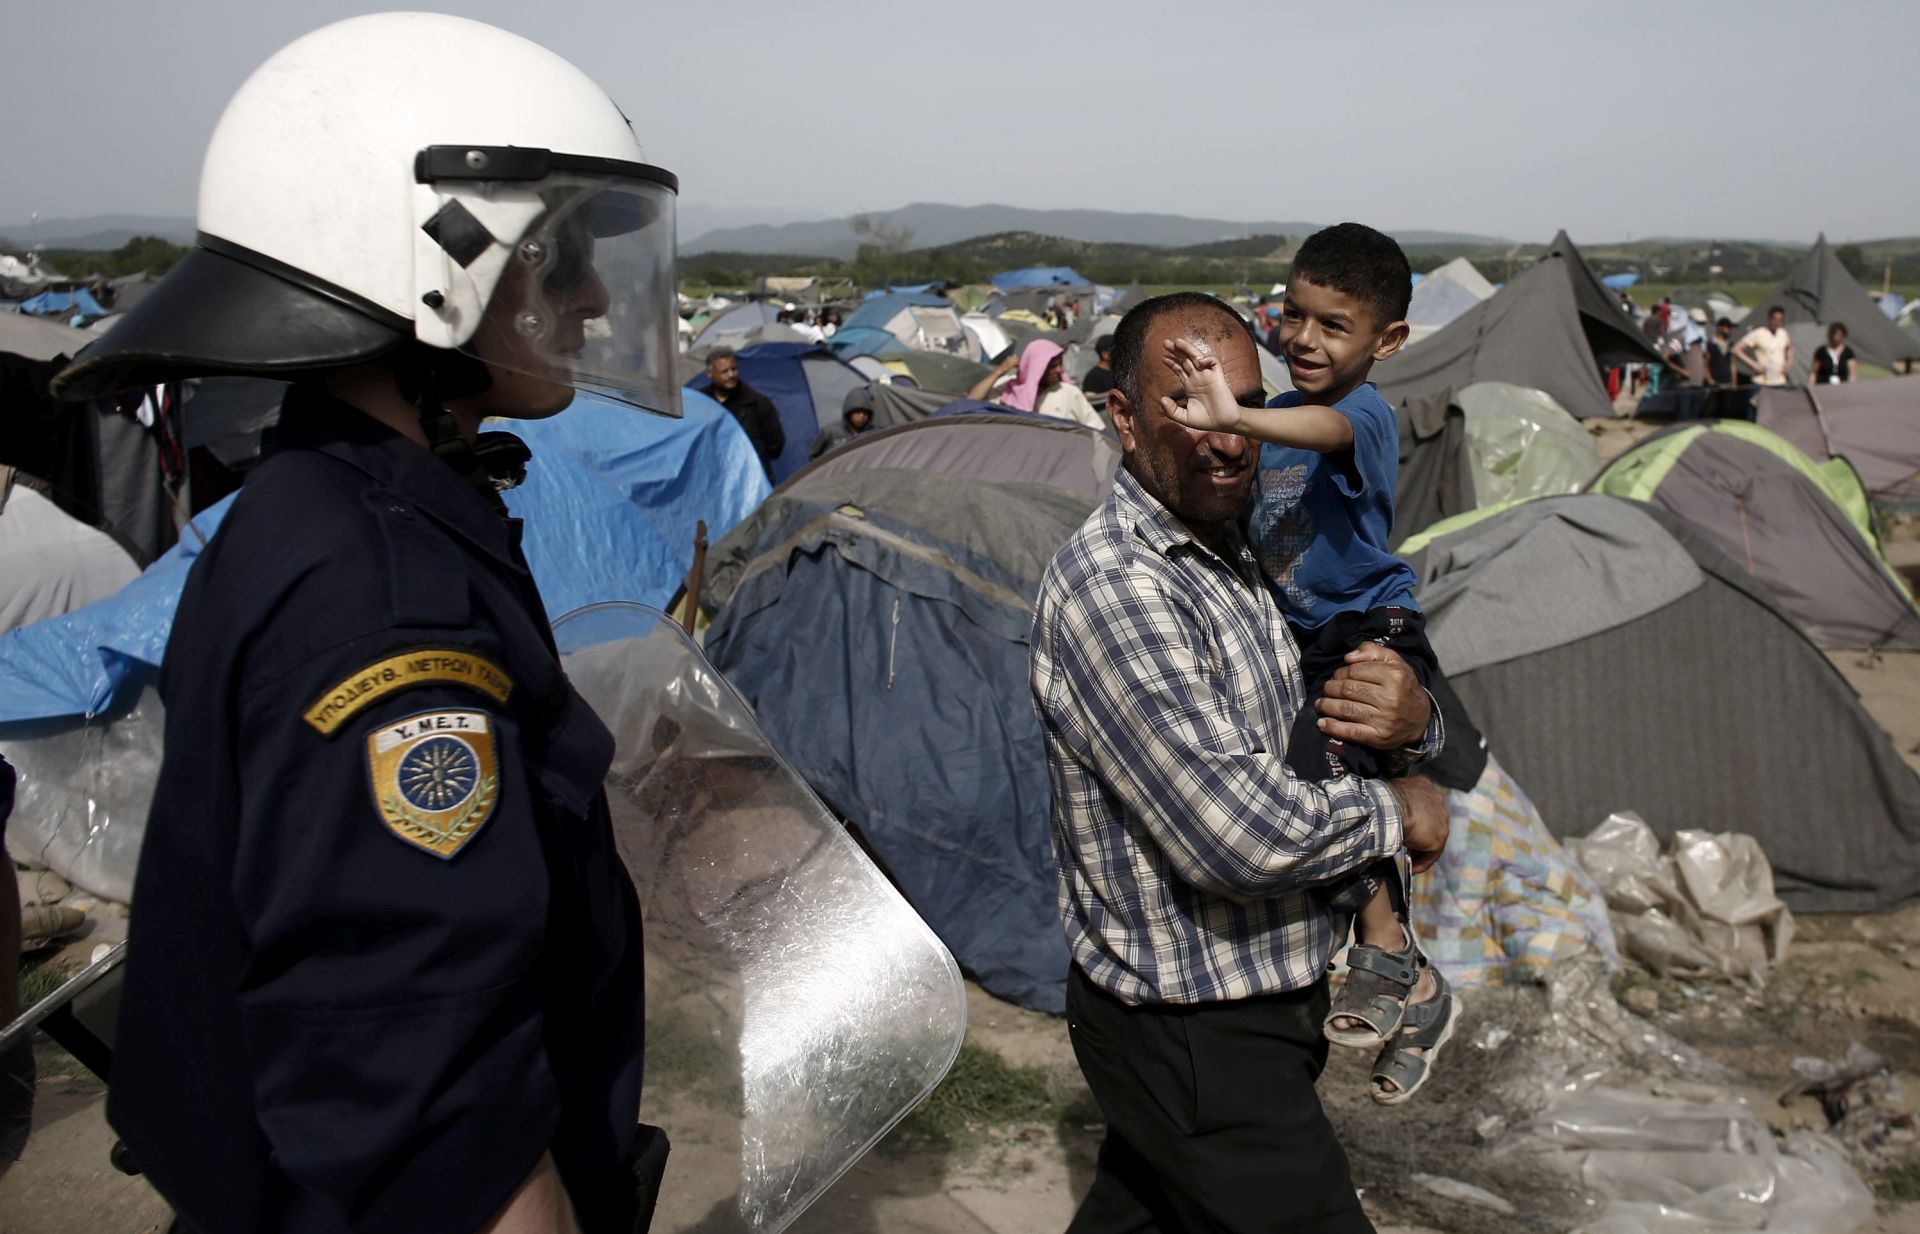 epa05265867 A refugee child waves to a Greek riot police officer after Greek riot police tried  to disperse refugees that threw rocks at a police van after a refugee was injured in the refugee camp of Idomeni near the Greek-FYROM borders, 18 April 2016.. A seriously injured refugee was rushed to a hospital from the camp at Idomeni, on the border between Greece and the Former Yugoslav Republic of Macedonia. The incident sparked tension in the camp, where residents attacked a police van that they considered was somehow involved, throwing stones and causing damage to the vehicle.  EPA/KOSTAS TSIRONIS